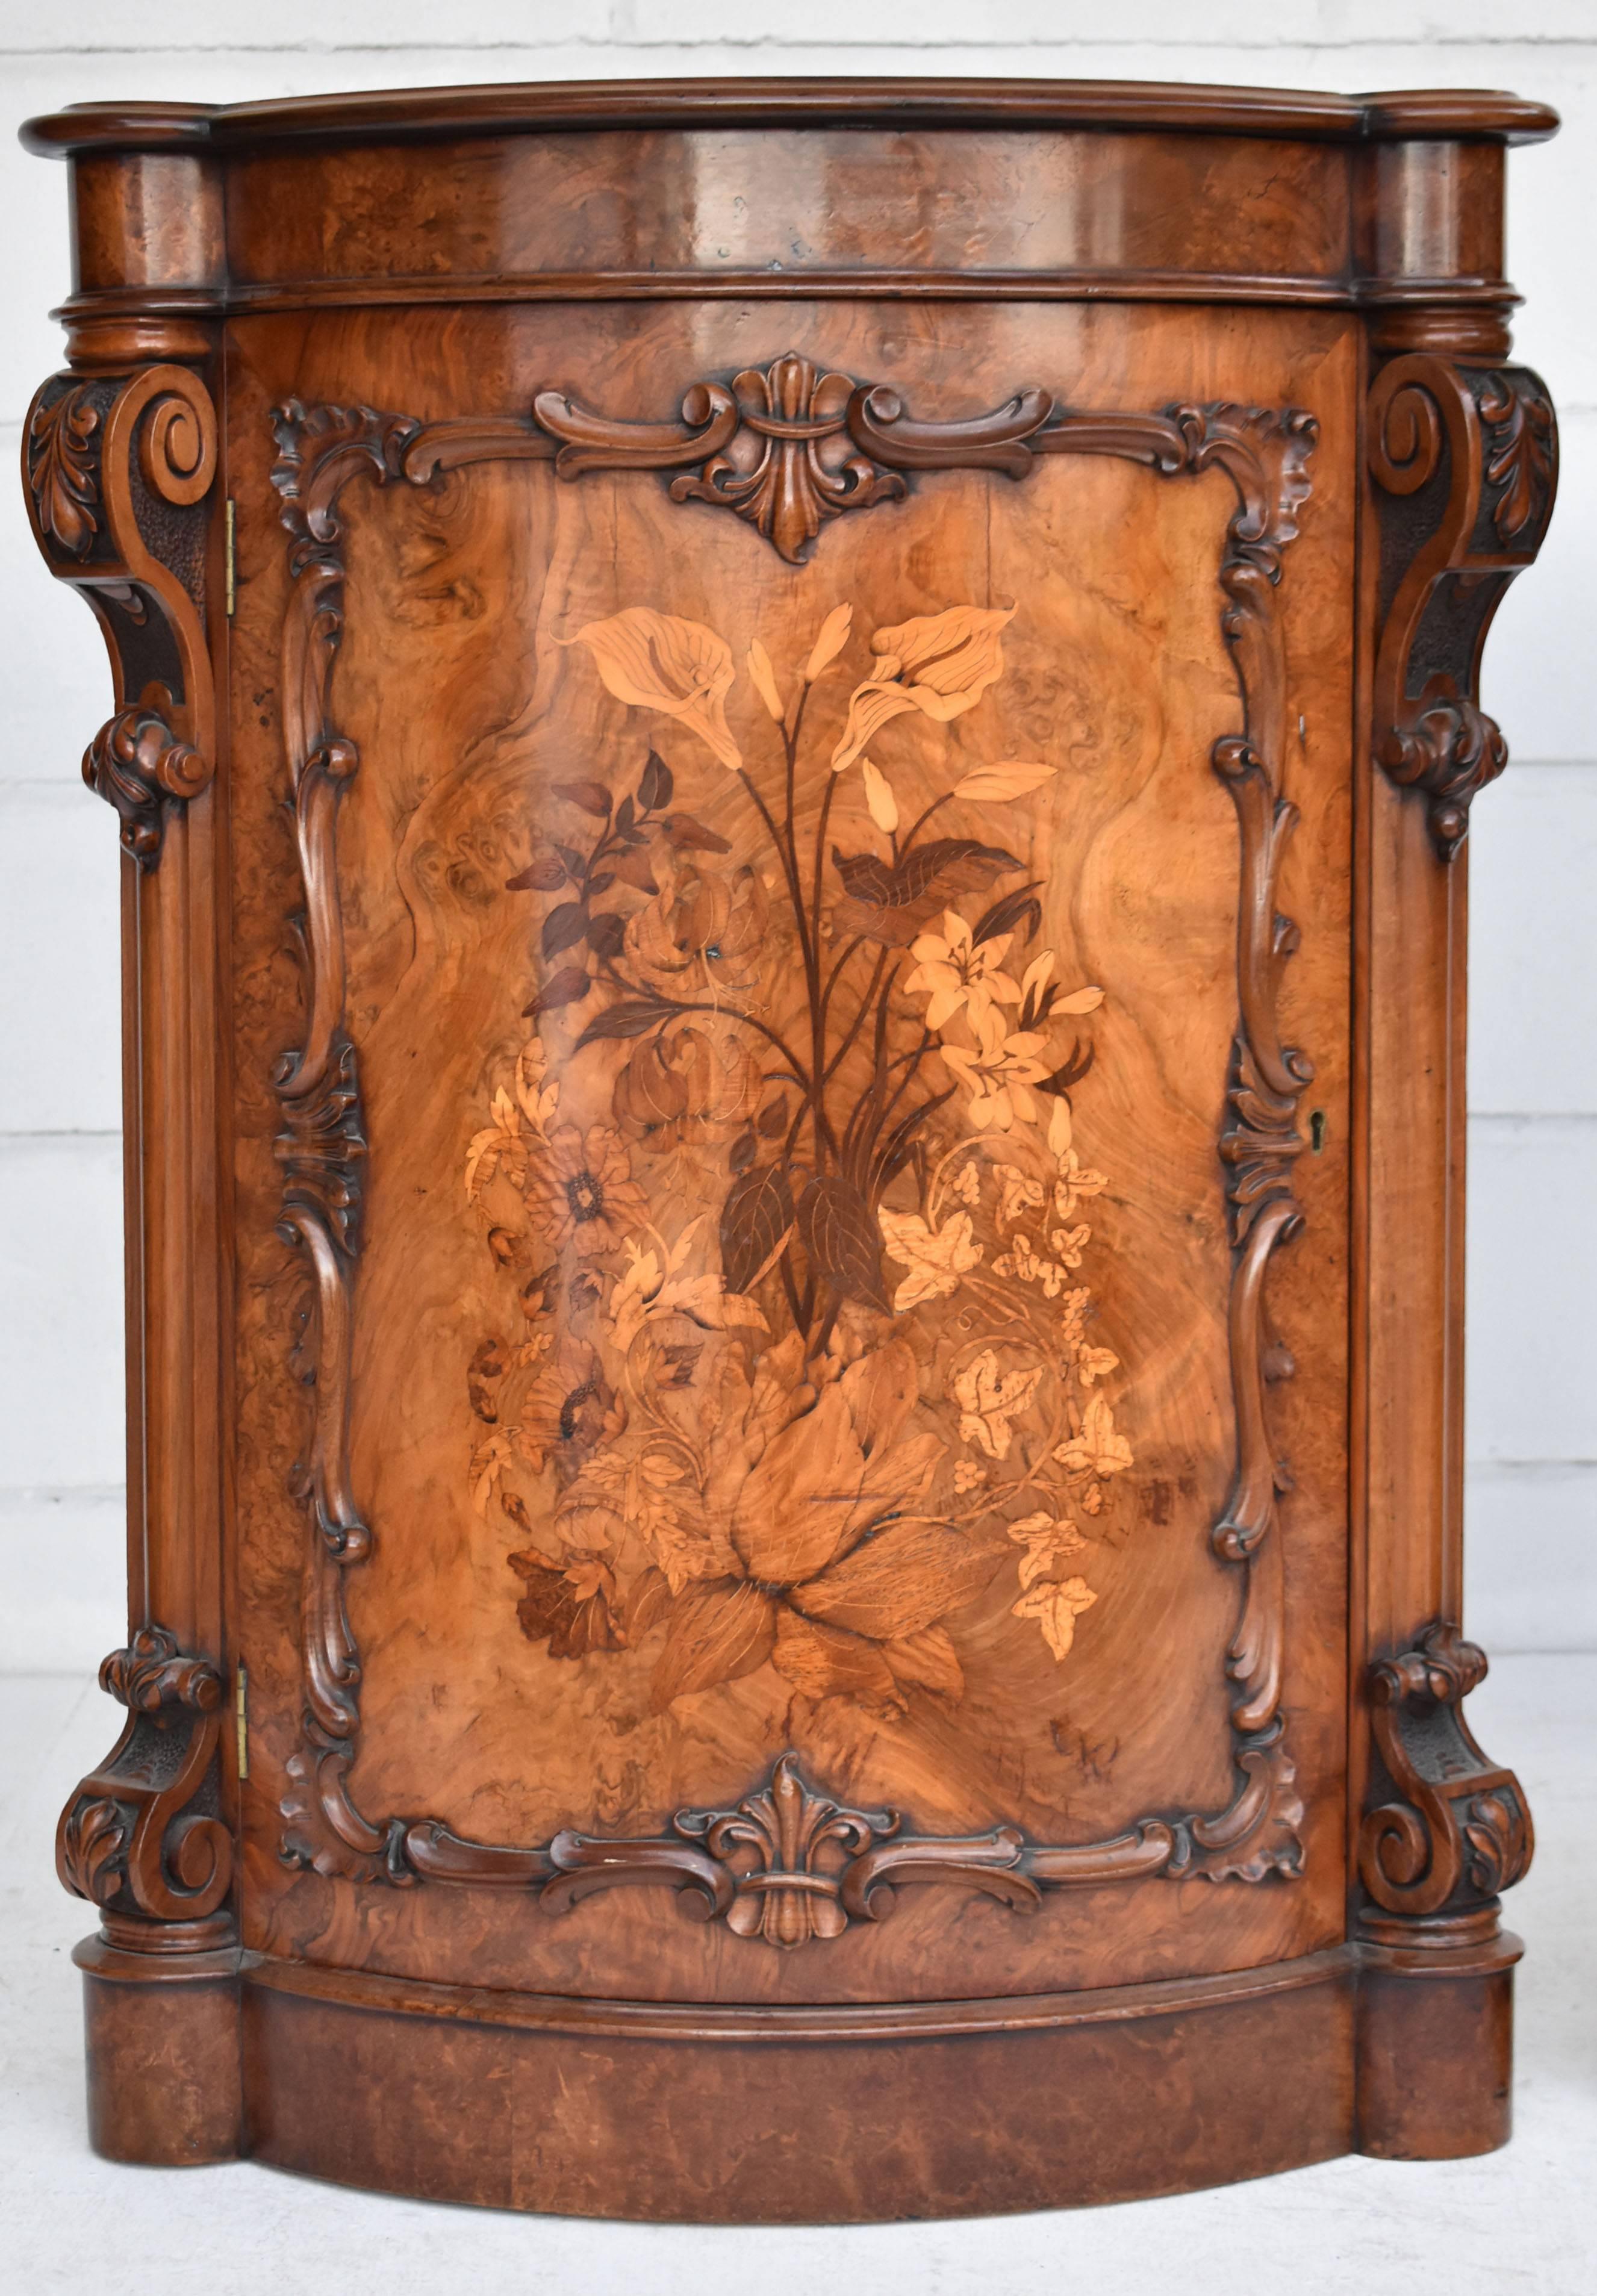 For sale is a fine quality pair of burr walnut corner cupboards, inlaid with specimen wood floral marquetry, with scroll carved mounts. Each cupboard is in very good condition. Both cupboards both open to reveal two shelves.

Measures: Width